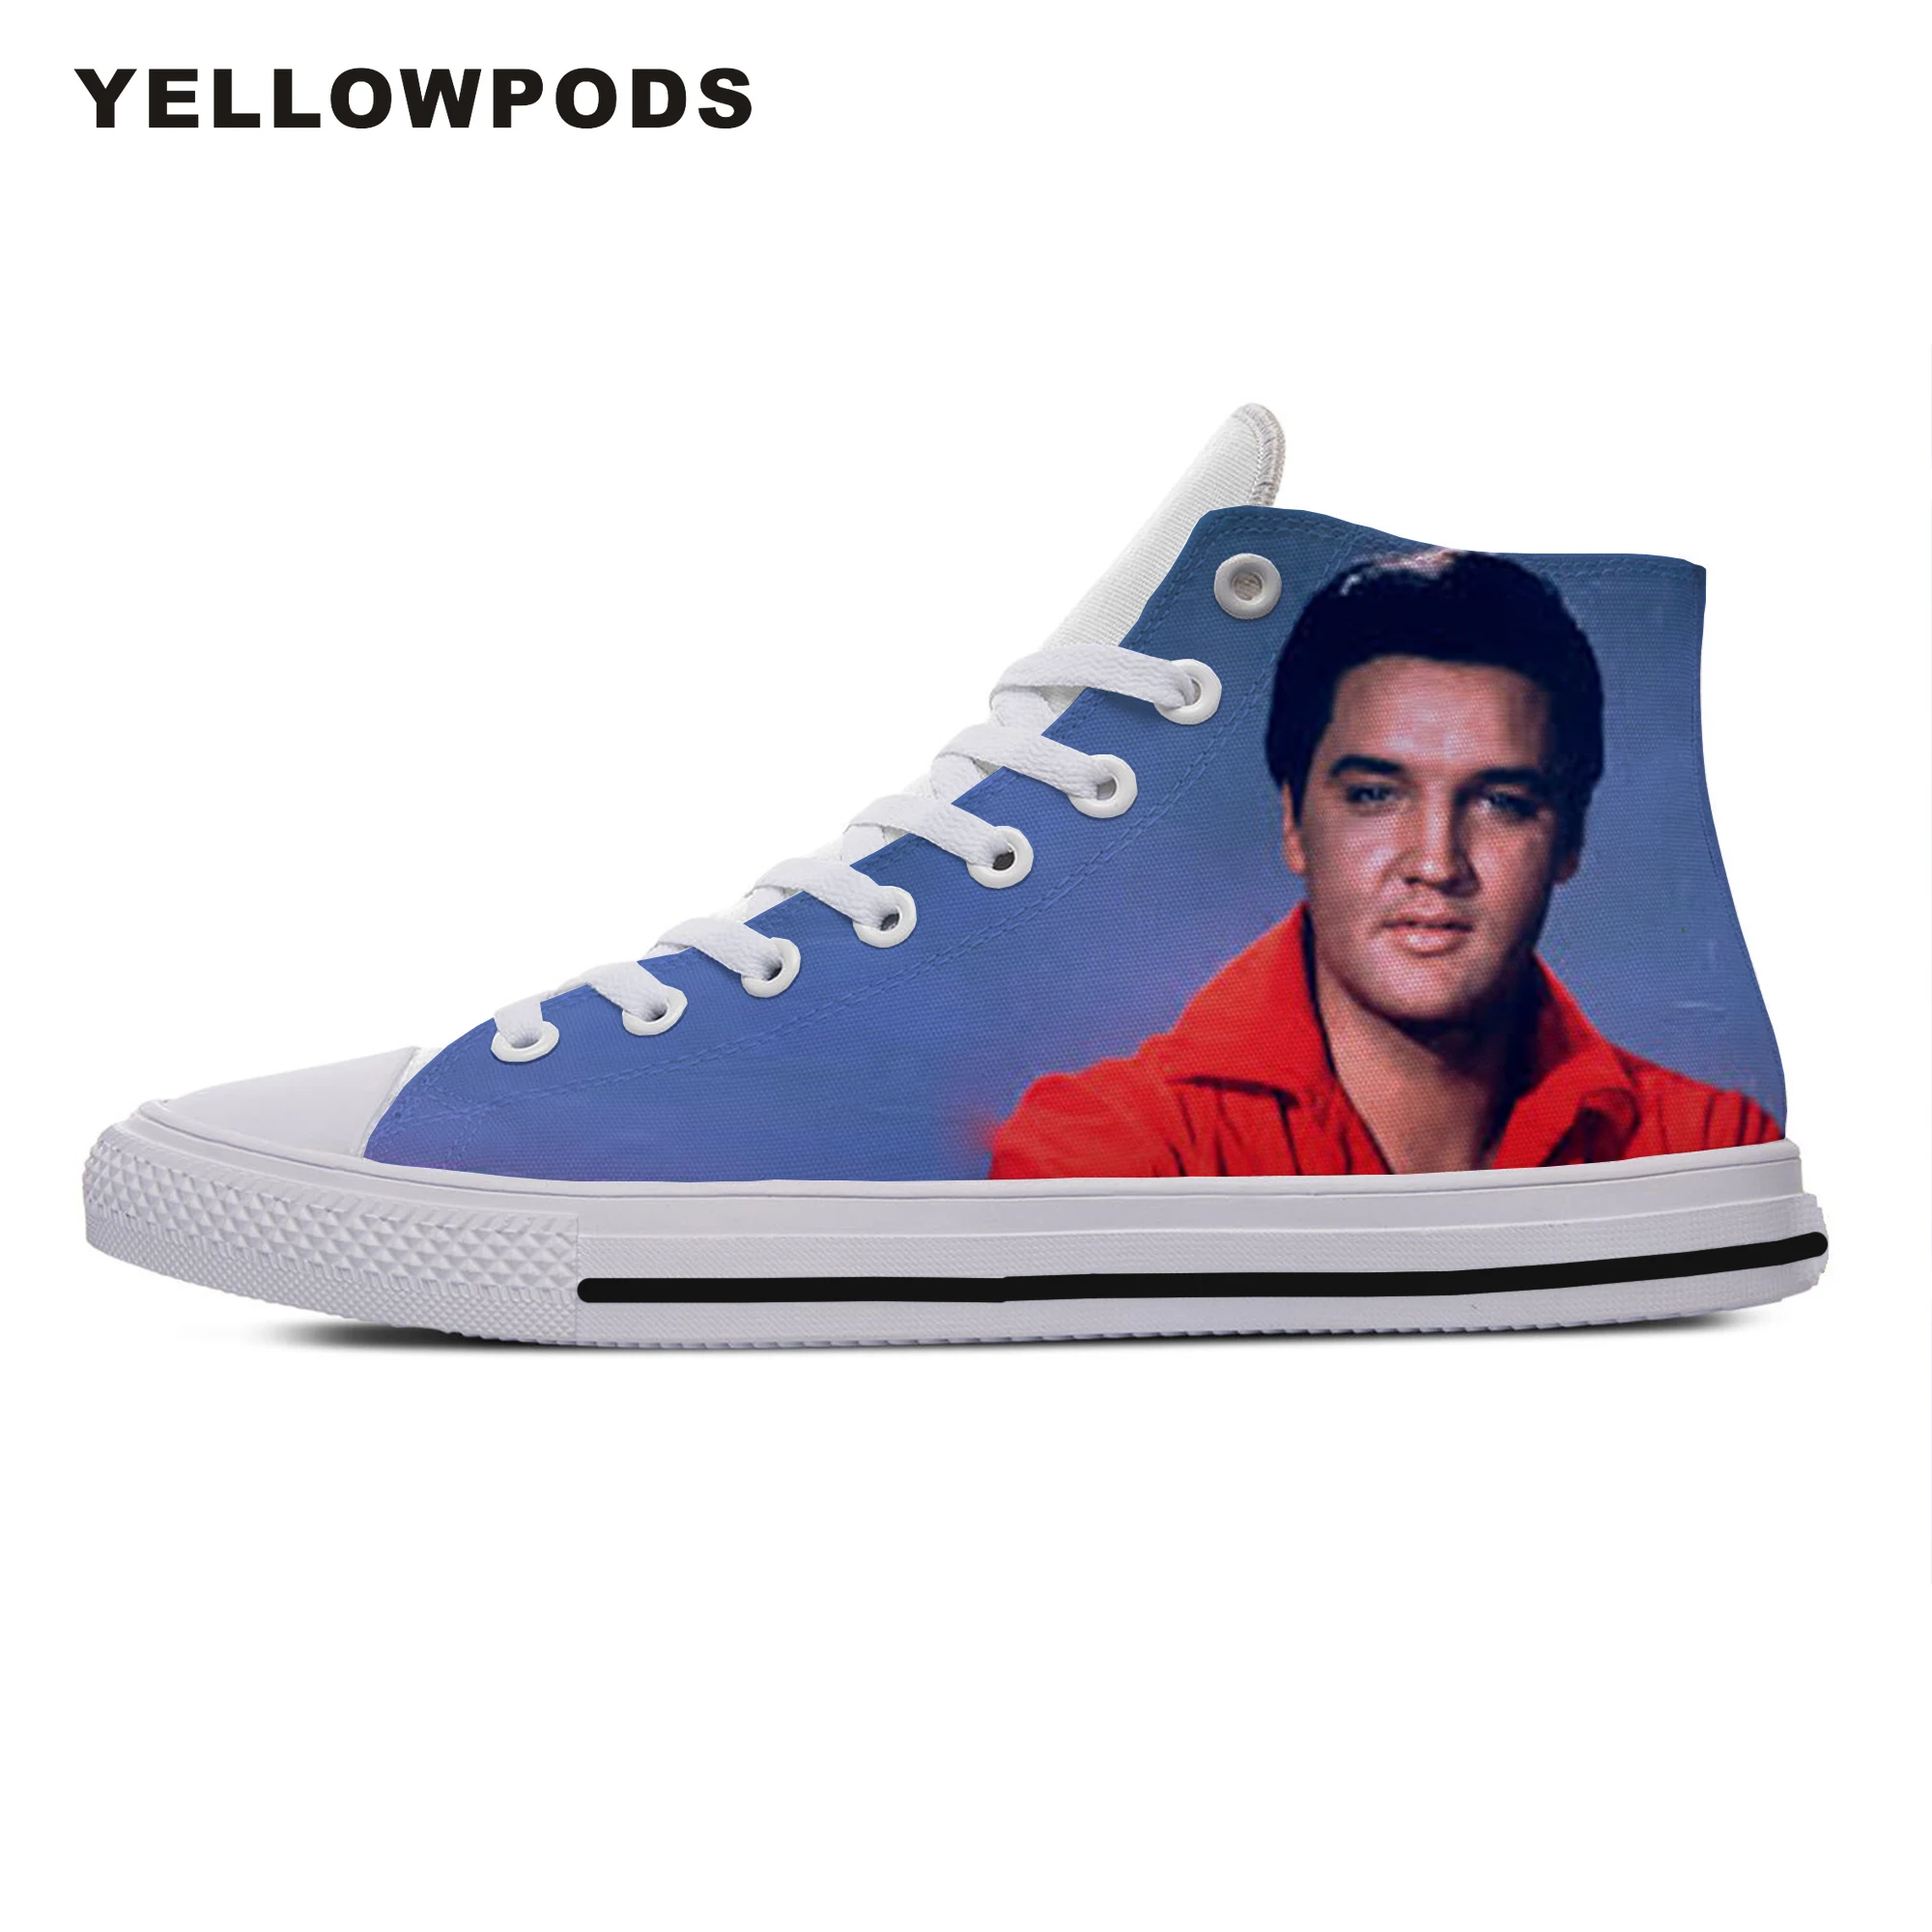 

Customized Running Shoes High Quality Funny Handiness For Men Pop Rock Elvis Aaron Presley Cute Cartoon Custom Sneakers White